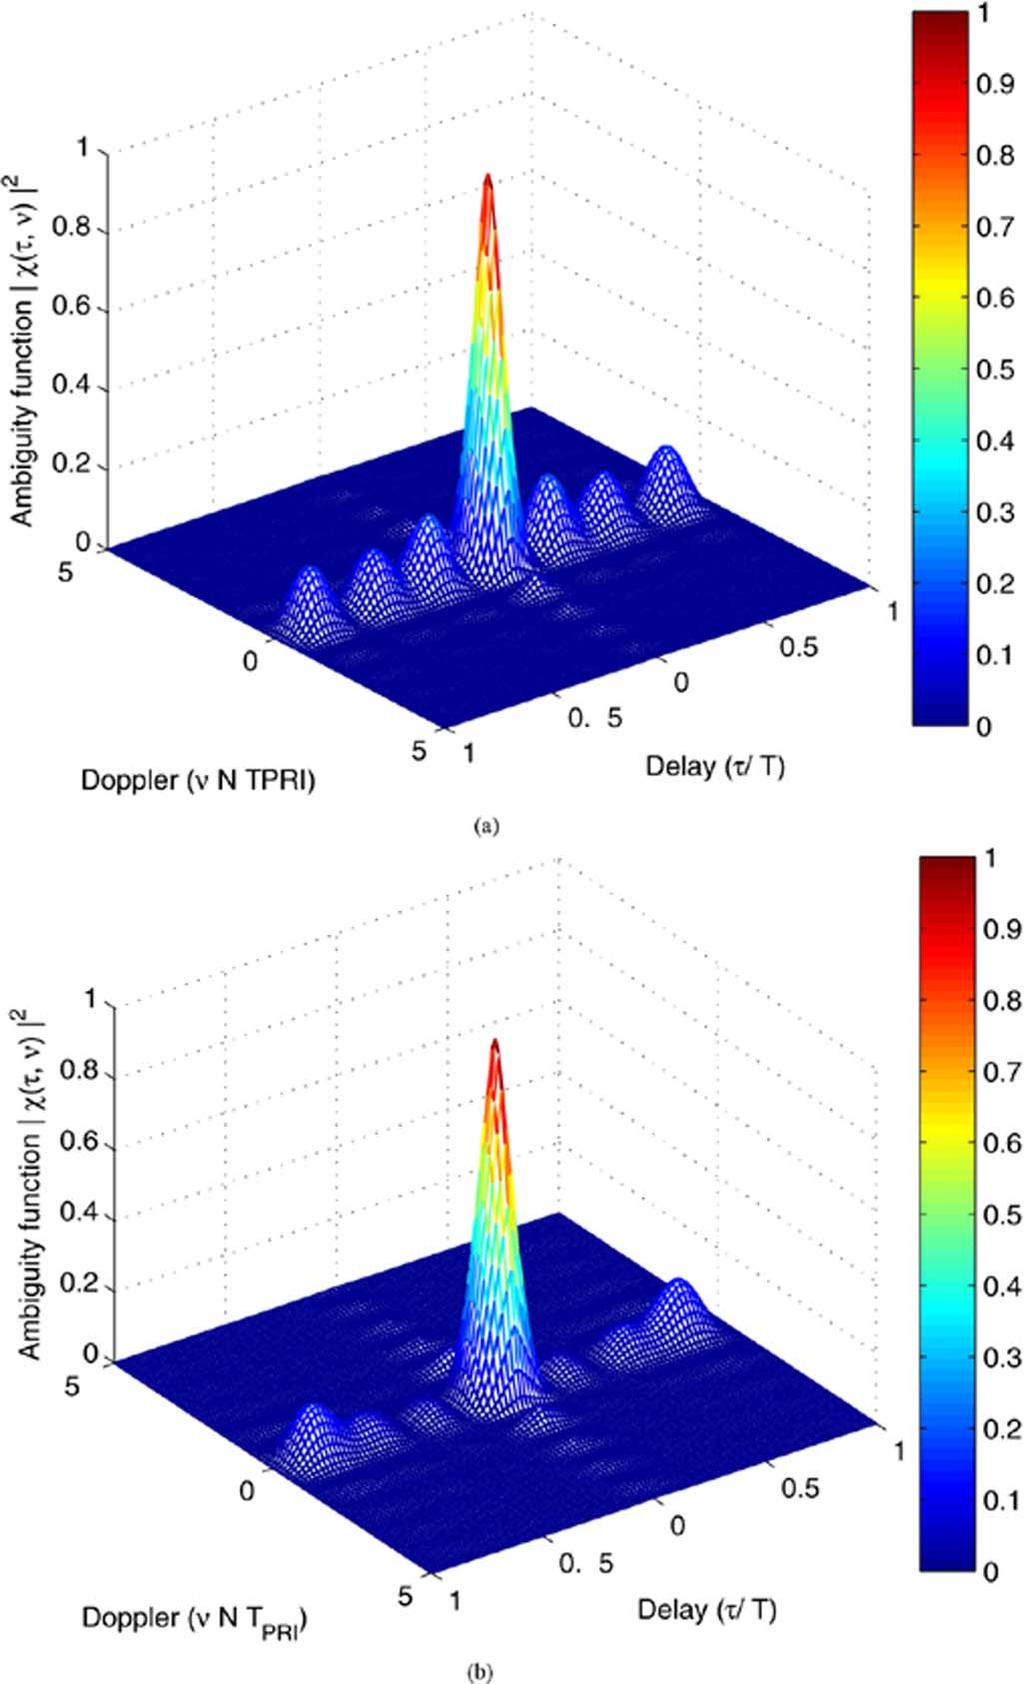 IEEE RANSACIONS ON SIGNAL PROCESSING, VOL. 58, NO. 2, FEBRUARY 200 93 Fig.. Plots of widband ambiguity functions for (a) fixd and (b) adaptiv wavforms ovr a rgion R fjj ;jj(2 )g.